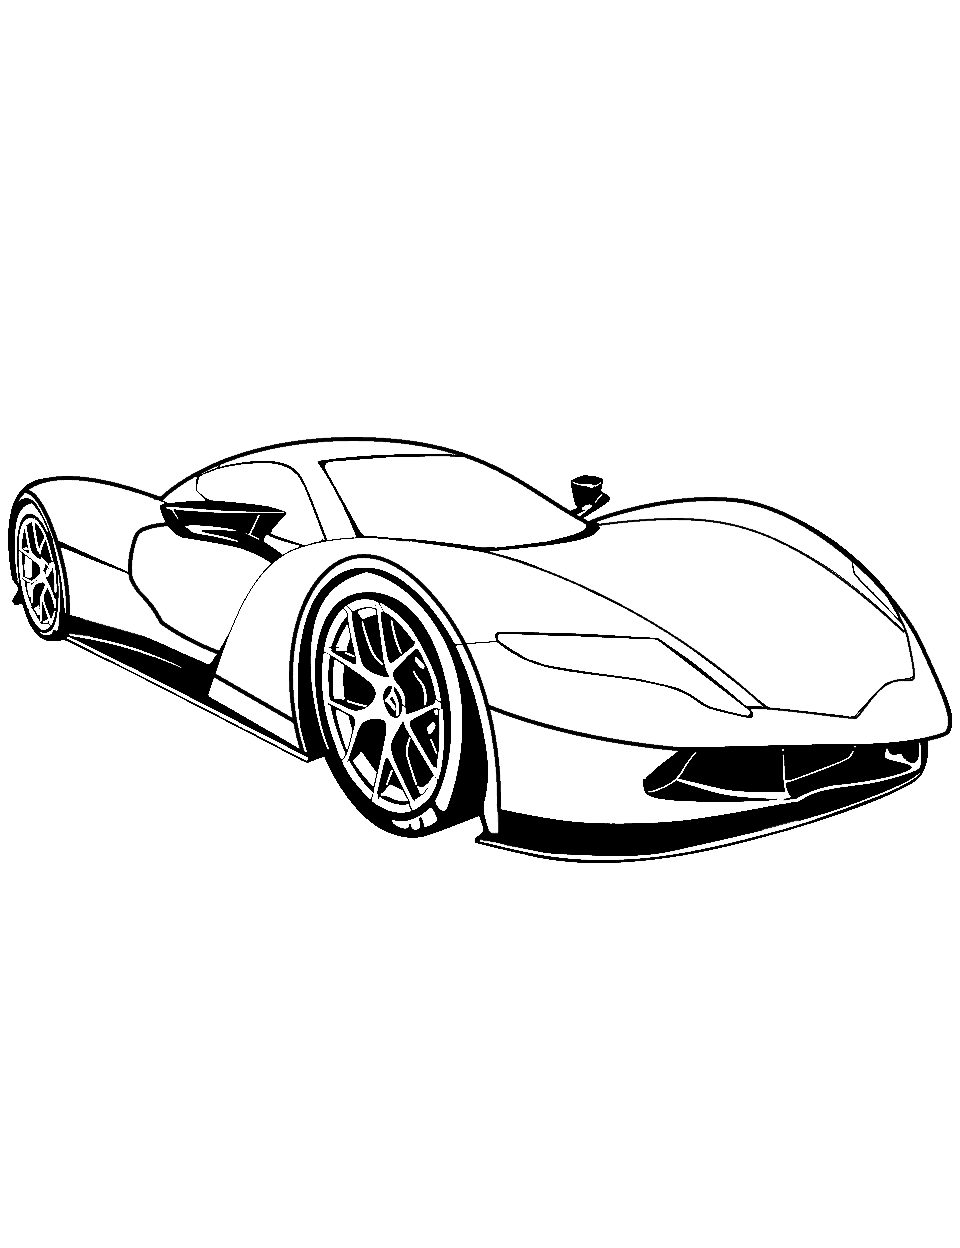 Electric Race Car Coloring Page - A futuristic, electric-powered race car.